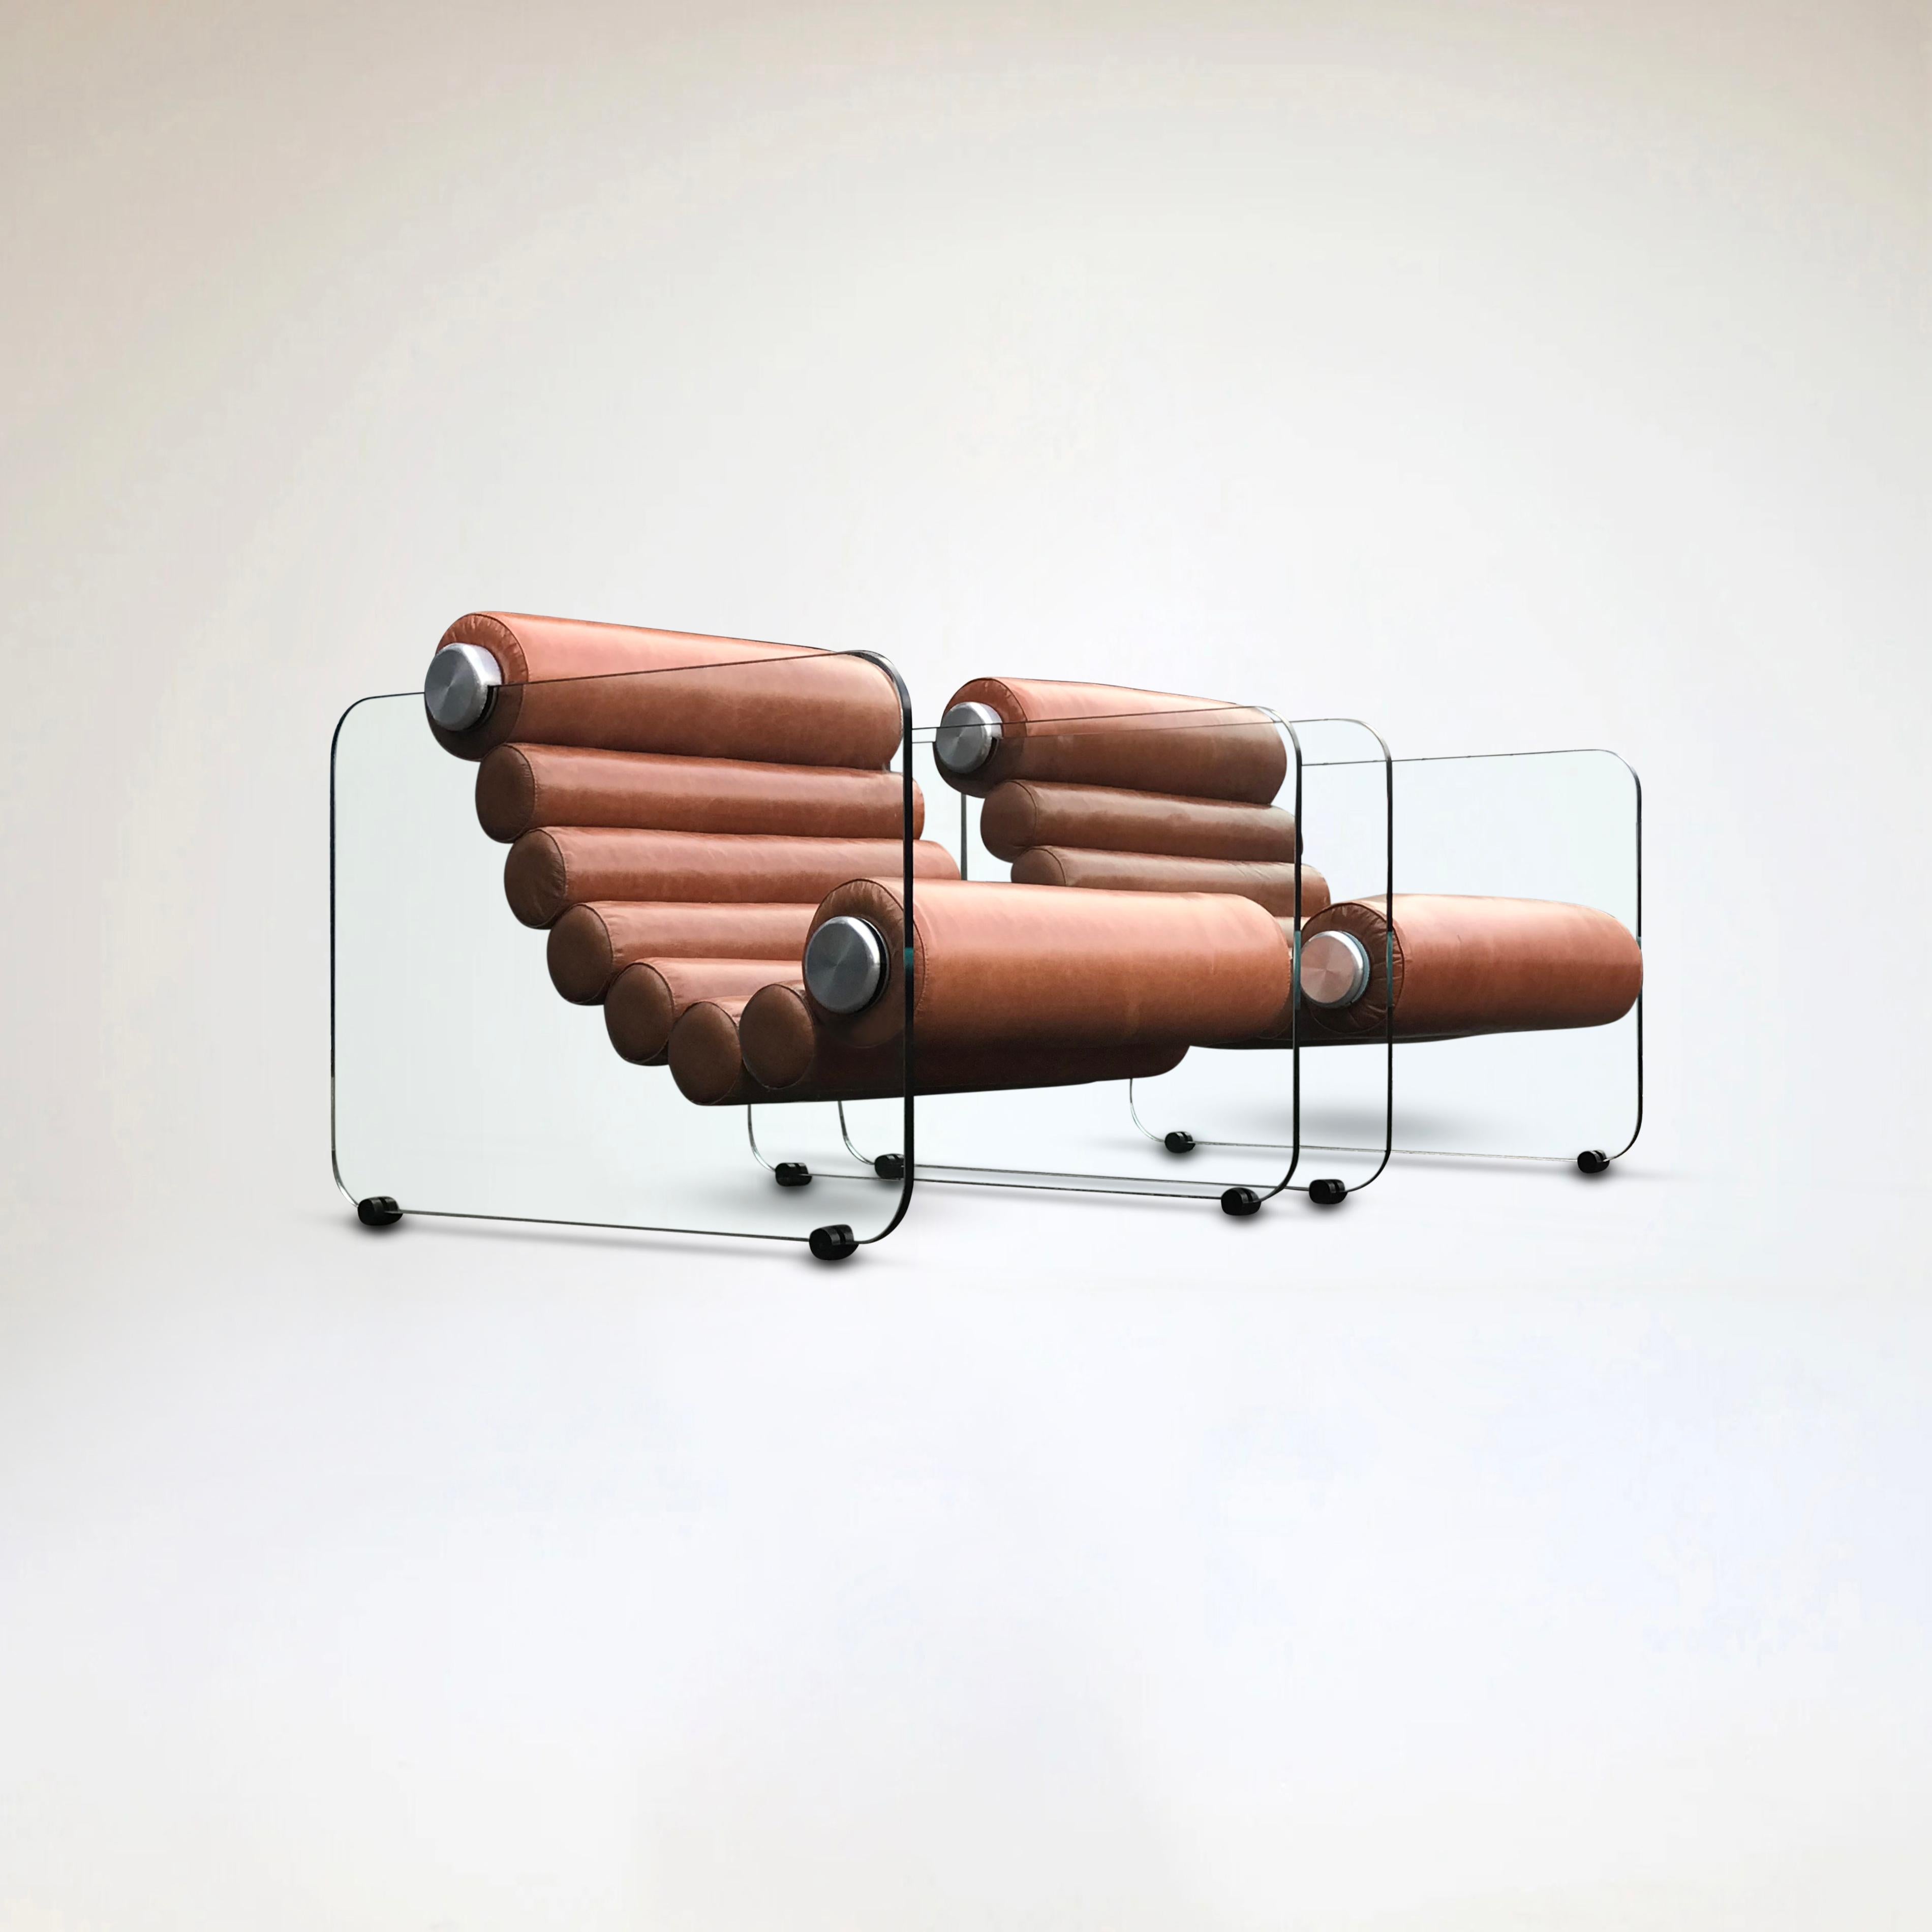 Space Age Hyaline leather and glass armchair by Fabio Lenci for Stendig Italy 1960s, set 2